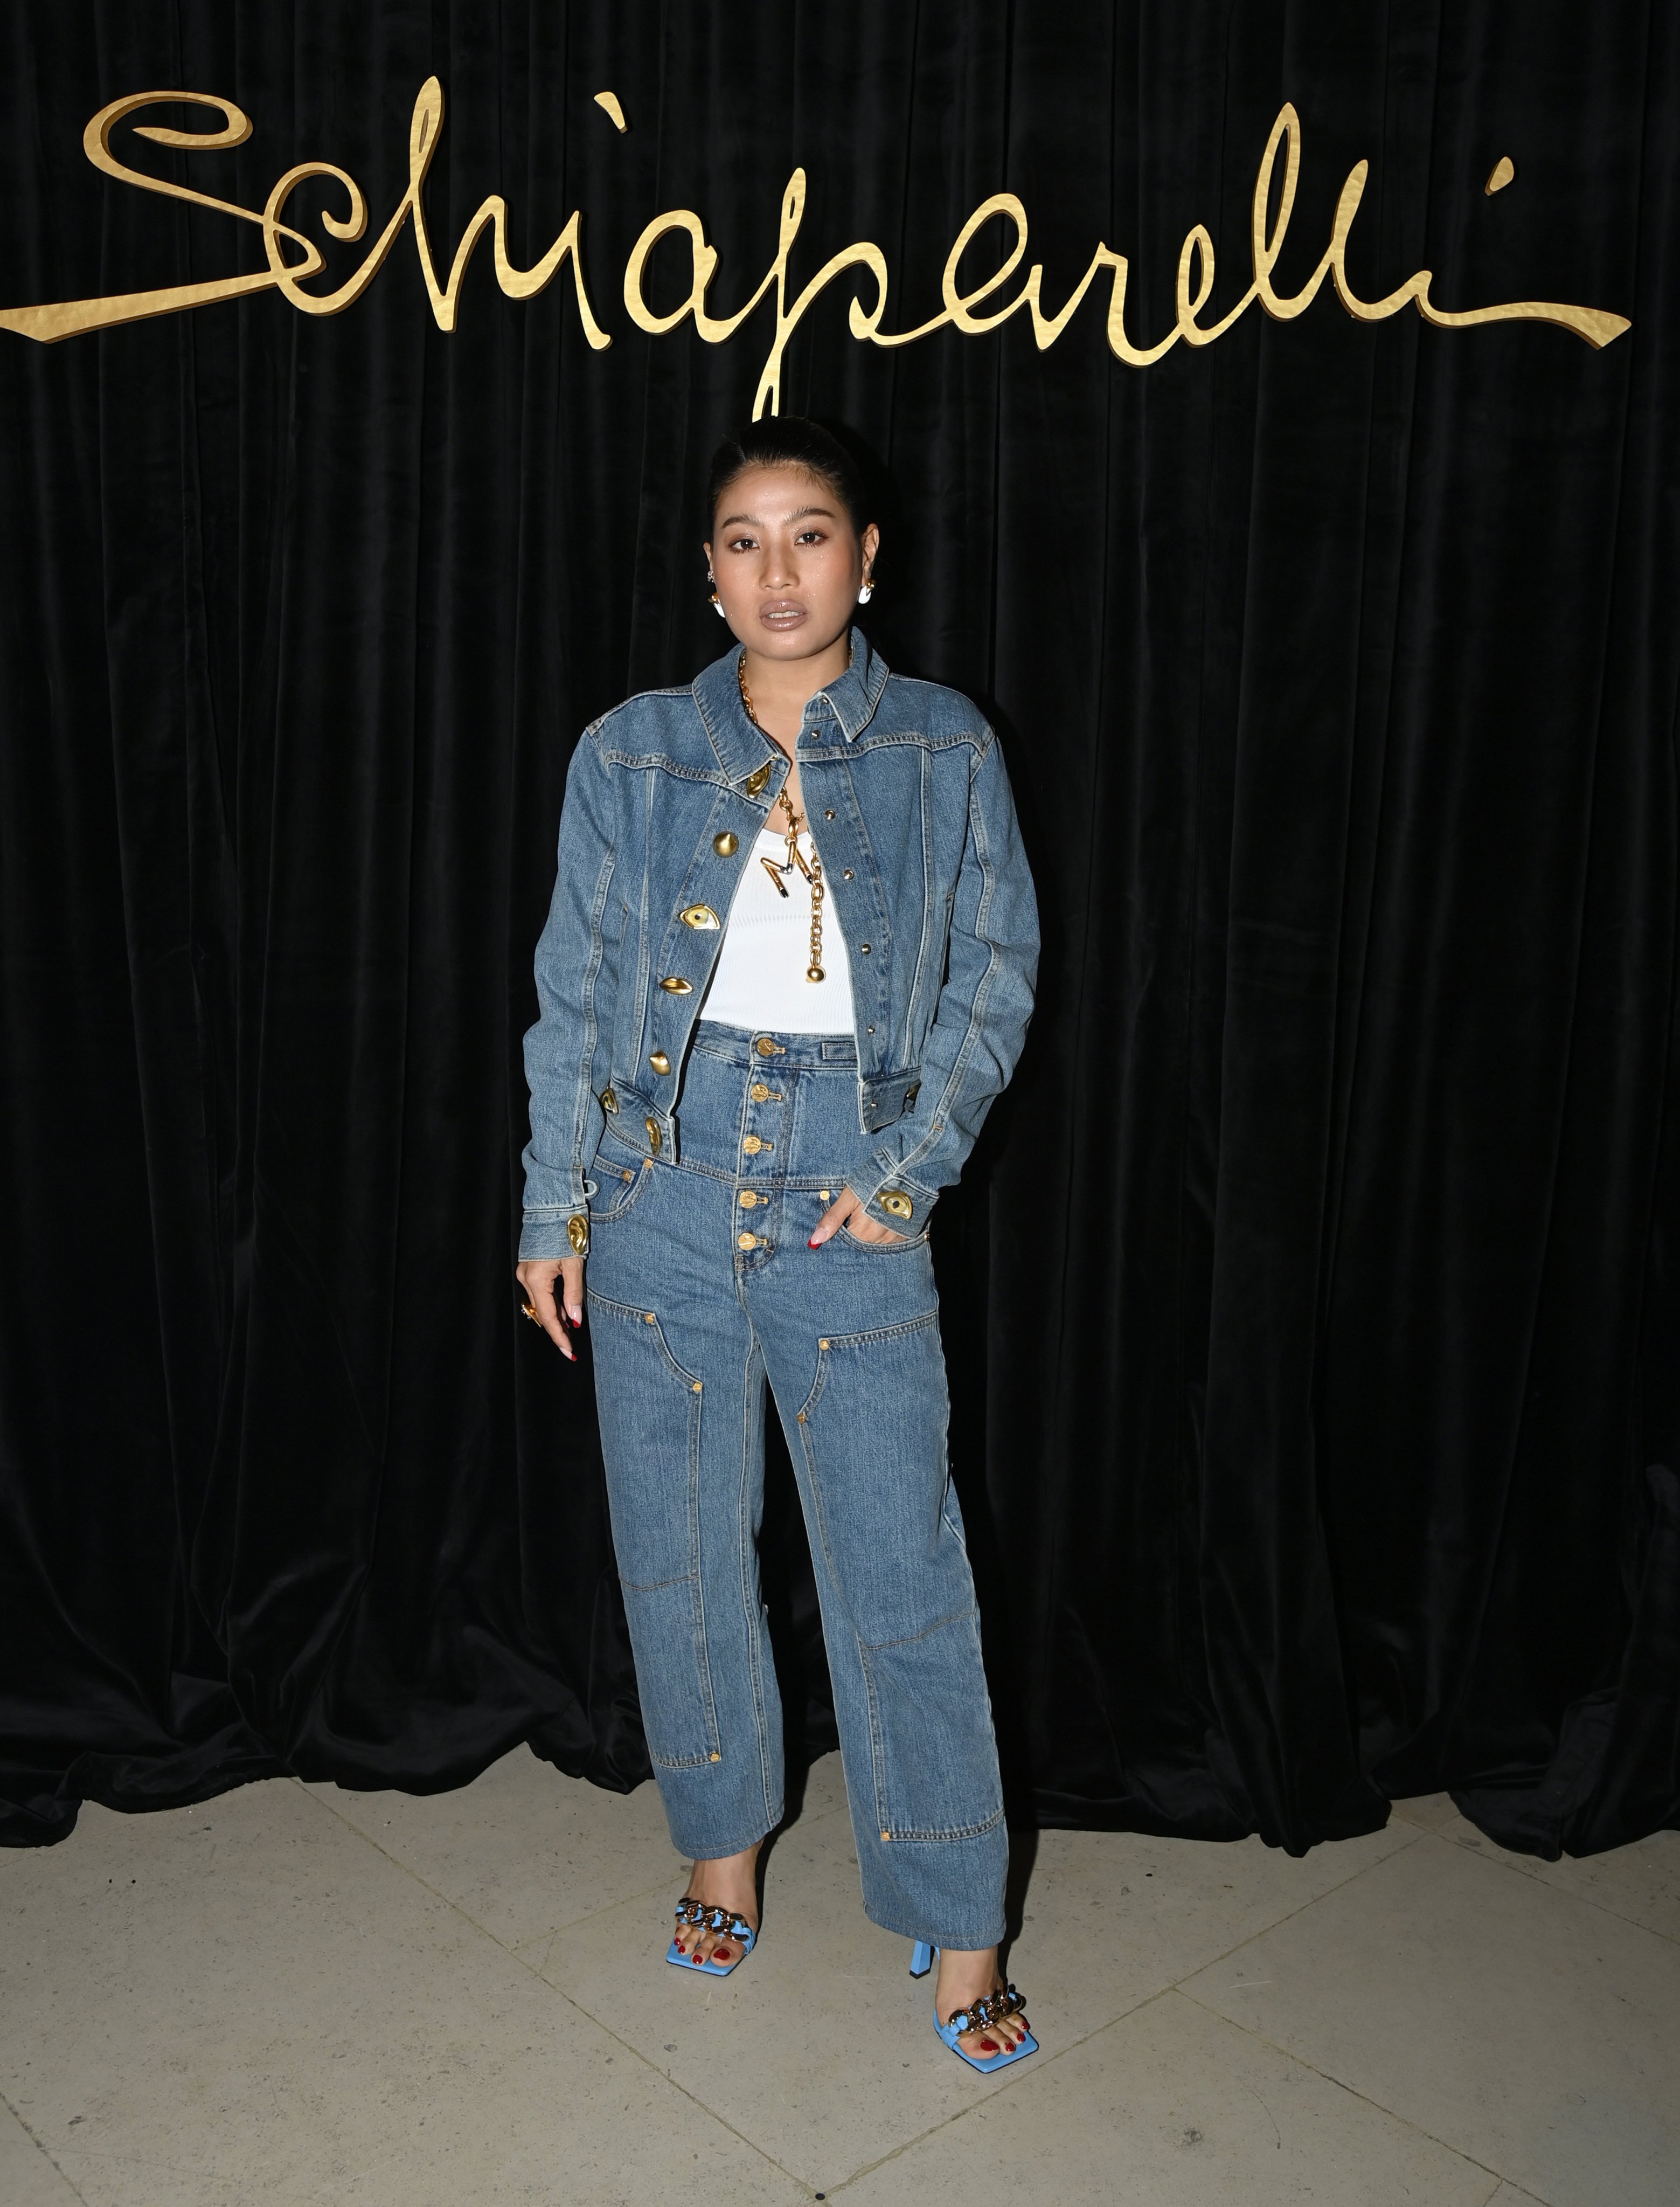 Princess of Thailand Sirivannavari went with an all-denim look at the Schiaparelli runway at last summer’s Paris Fashion Week – here’s how you too can be a jean genie. Photo: Getty Images